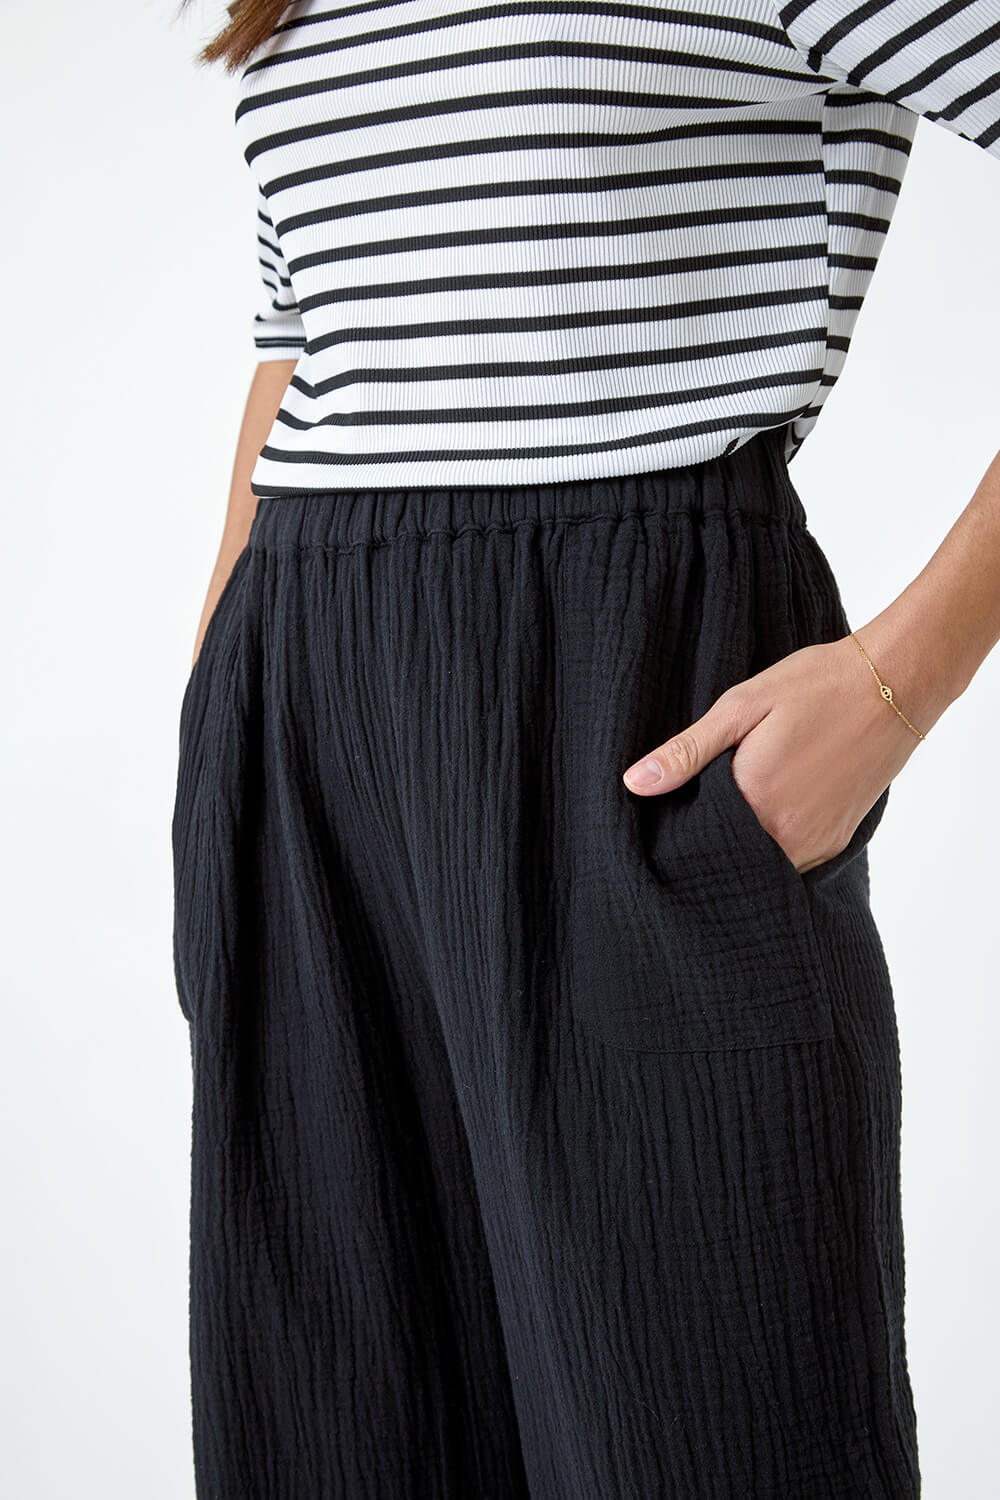 Black Textured Cotton Culotte Trousers, Image 5 of 5